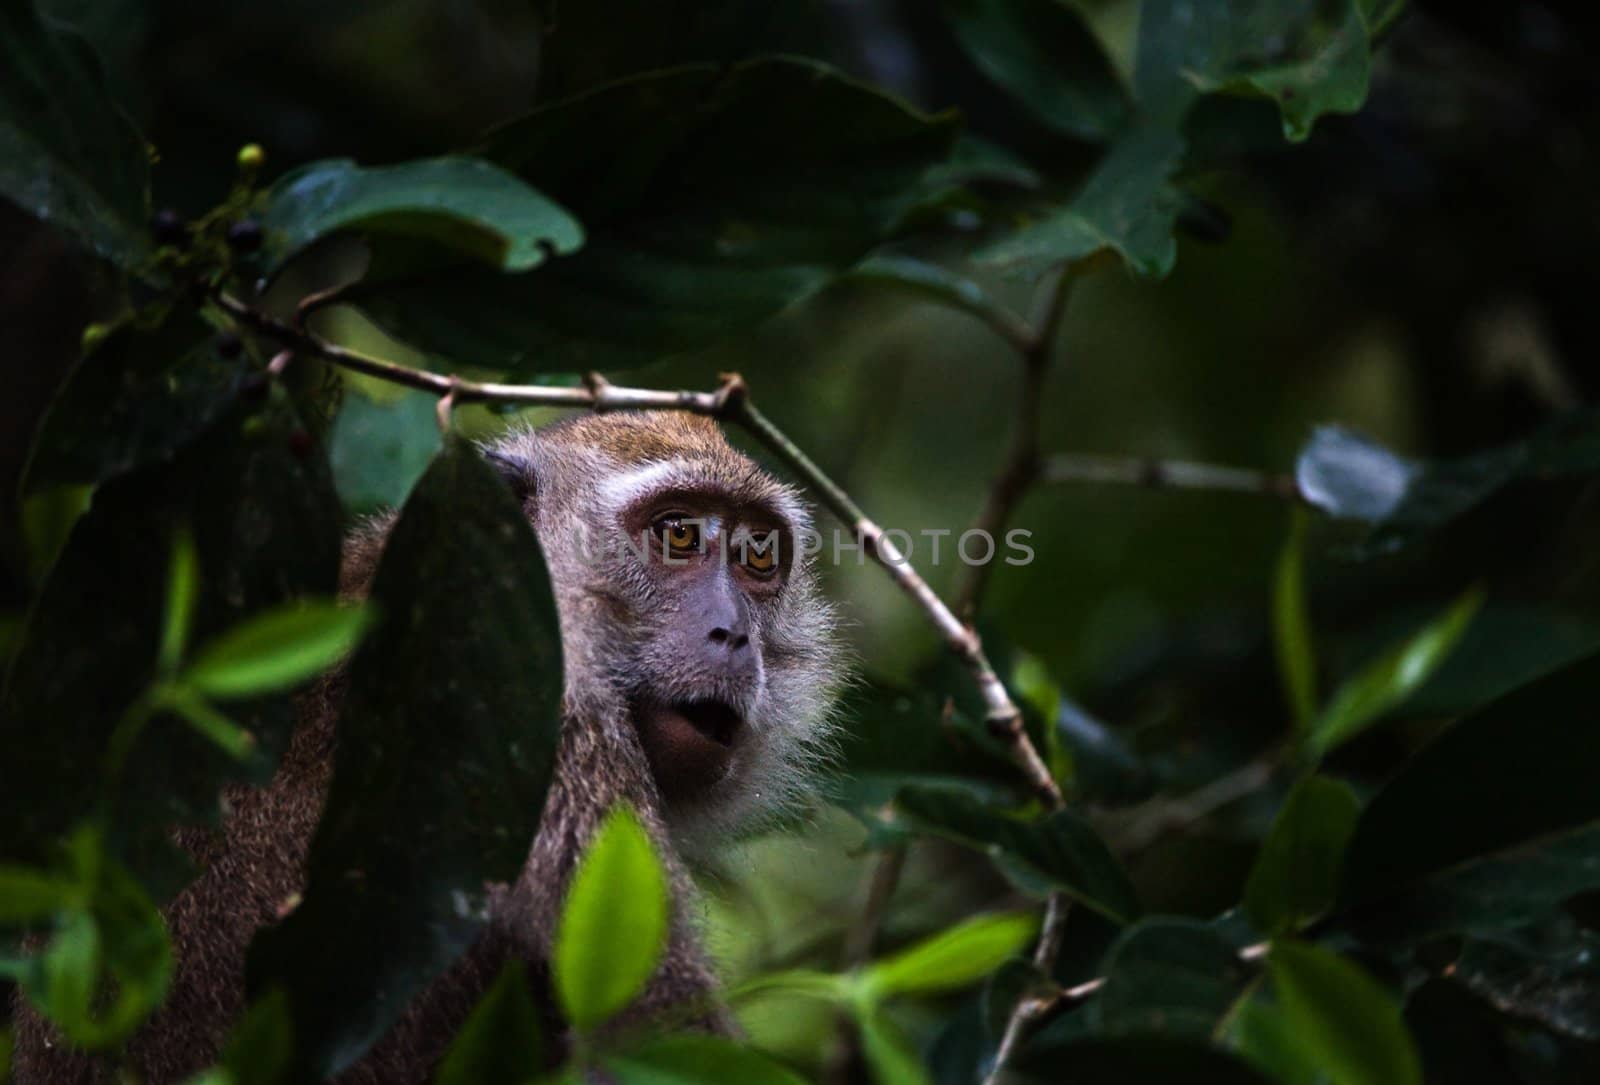 The monkey hides in tree branches./ Fearful glance of the monkey who have hidden behind branches of a tree.